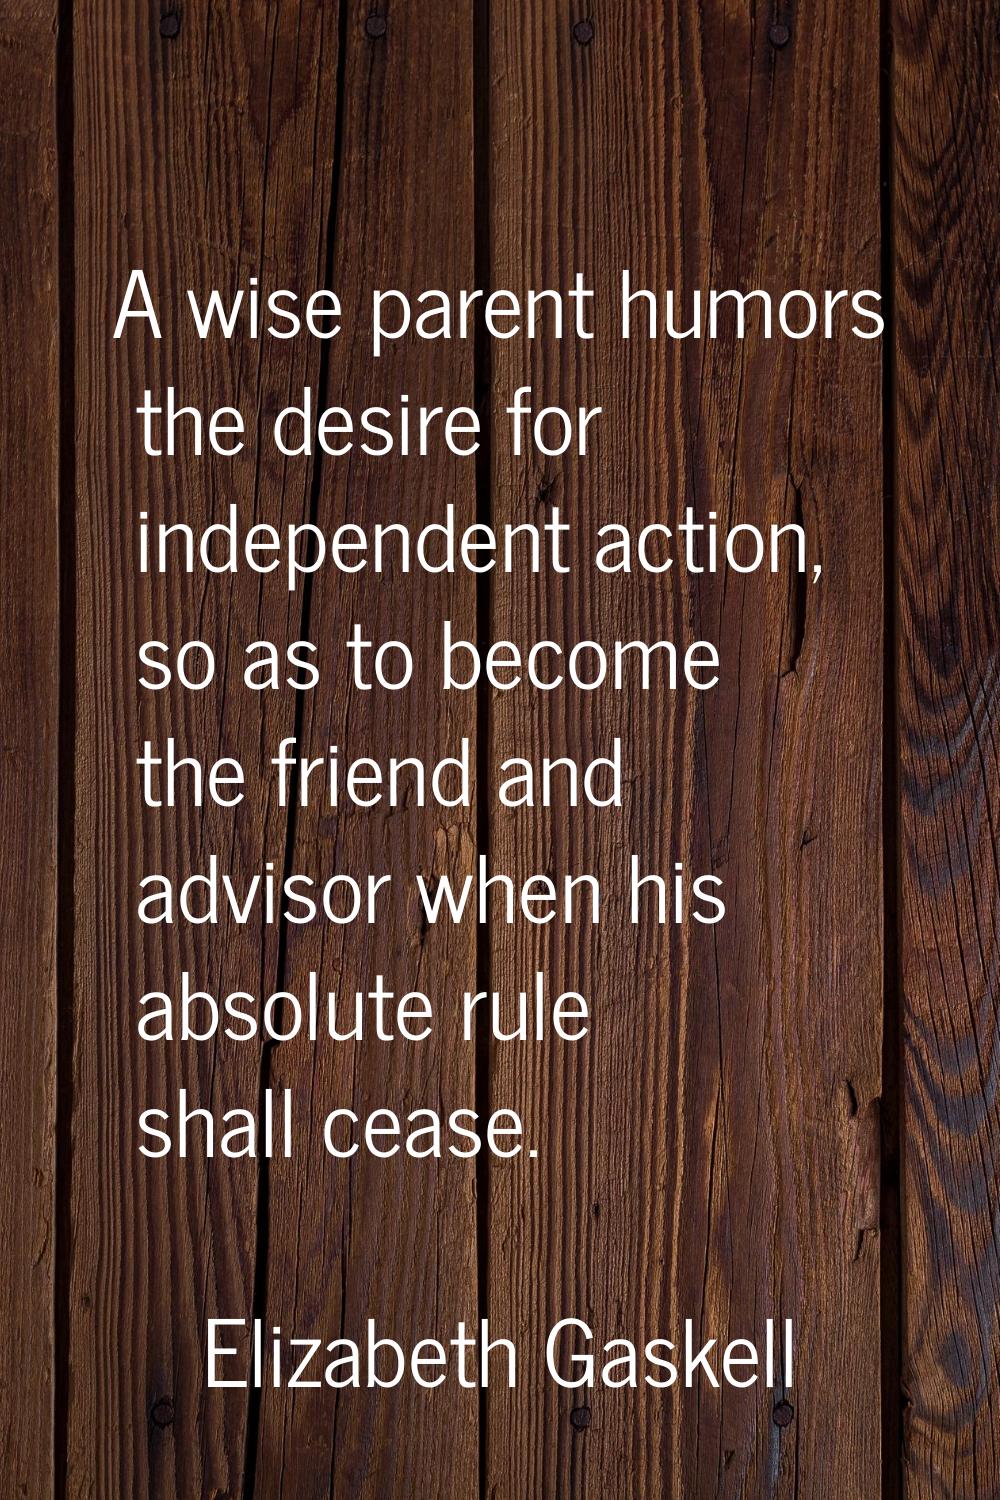 A wise parent humors the desire for independent action, so as to become the friend and advisor when